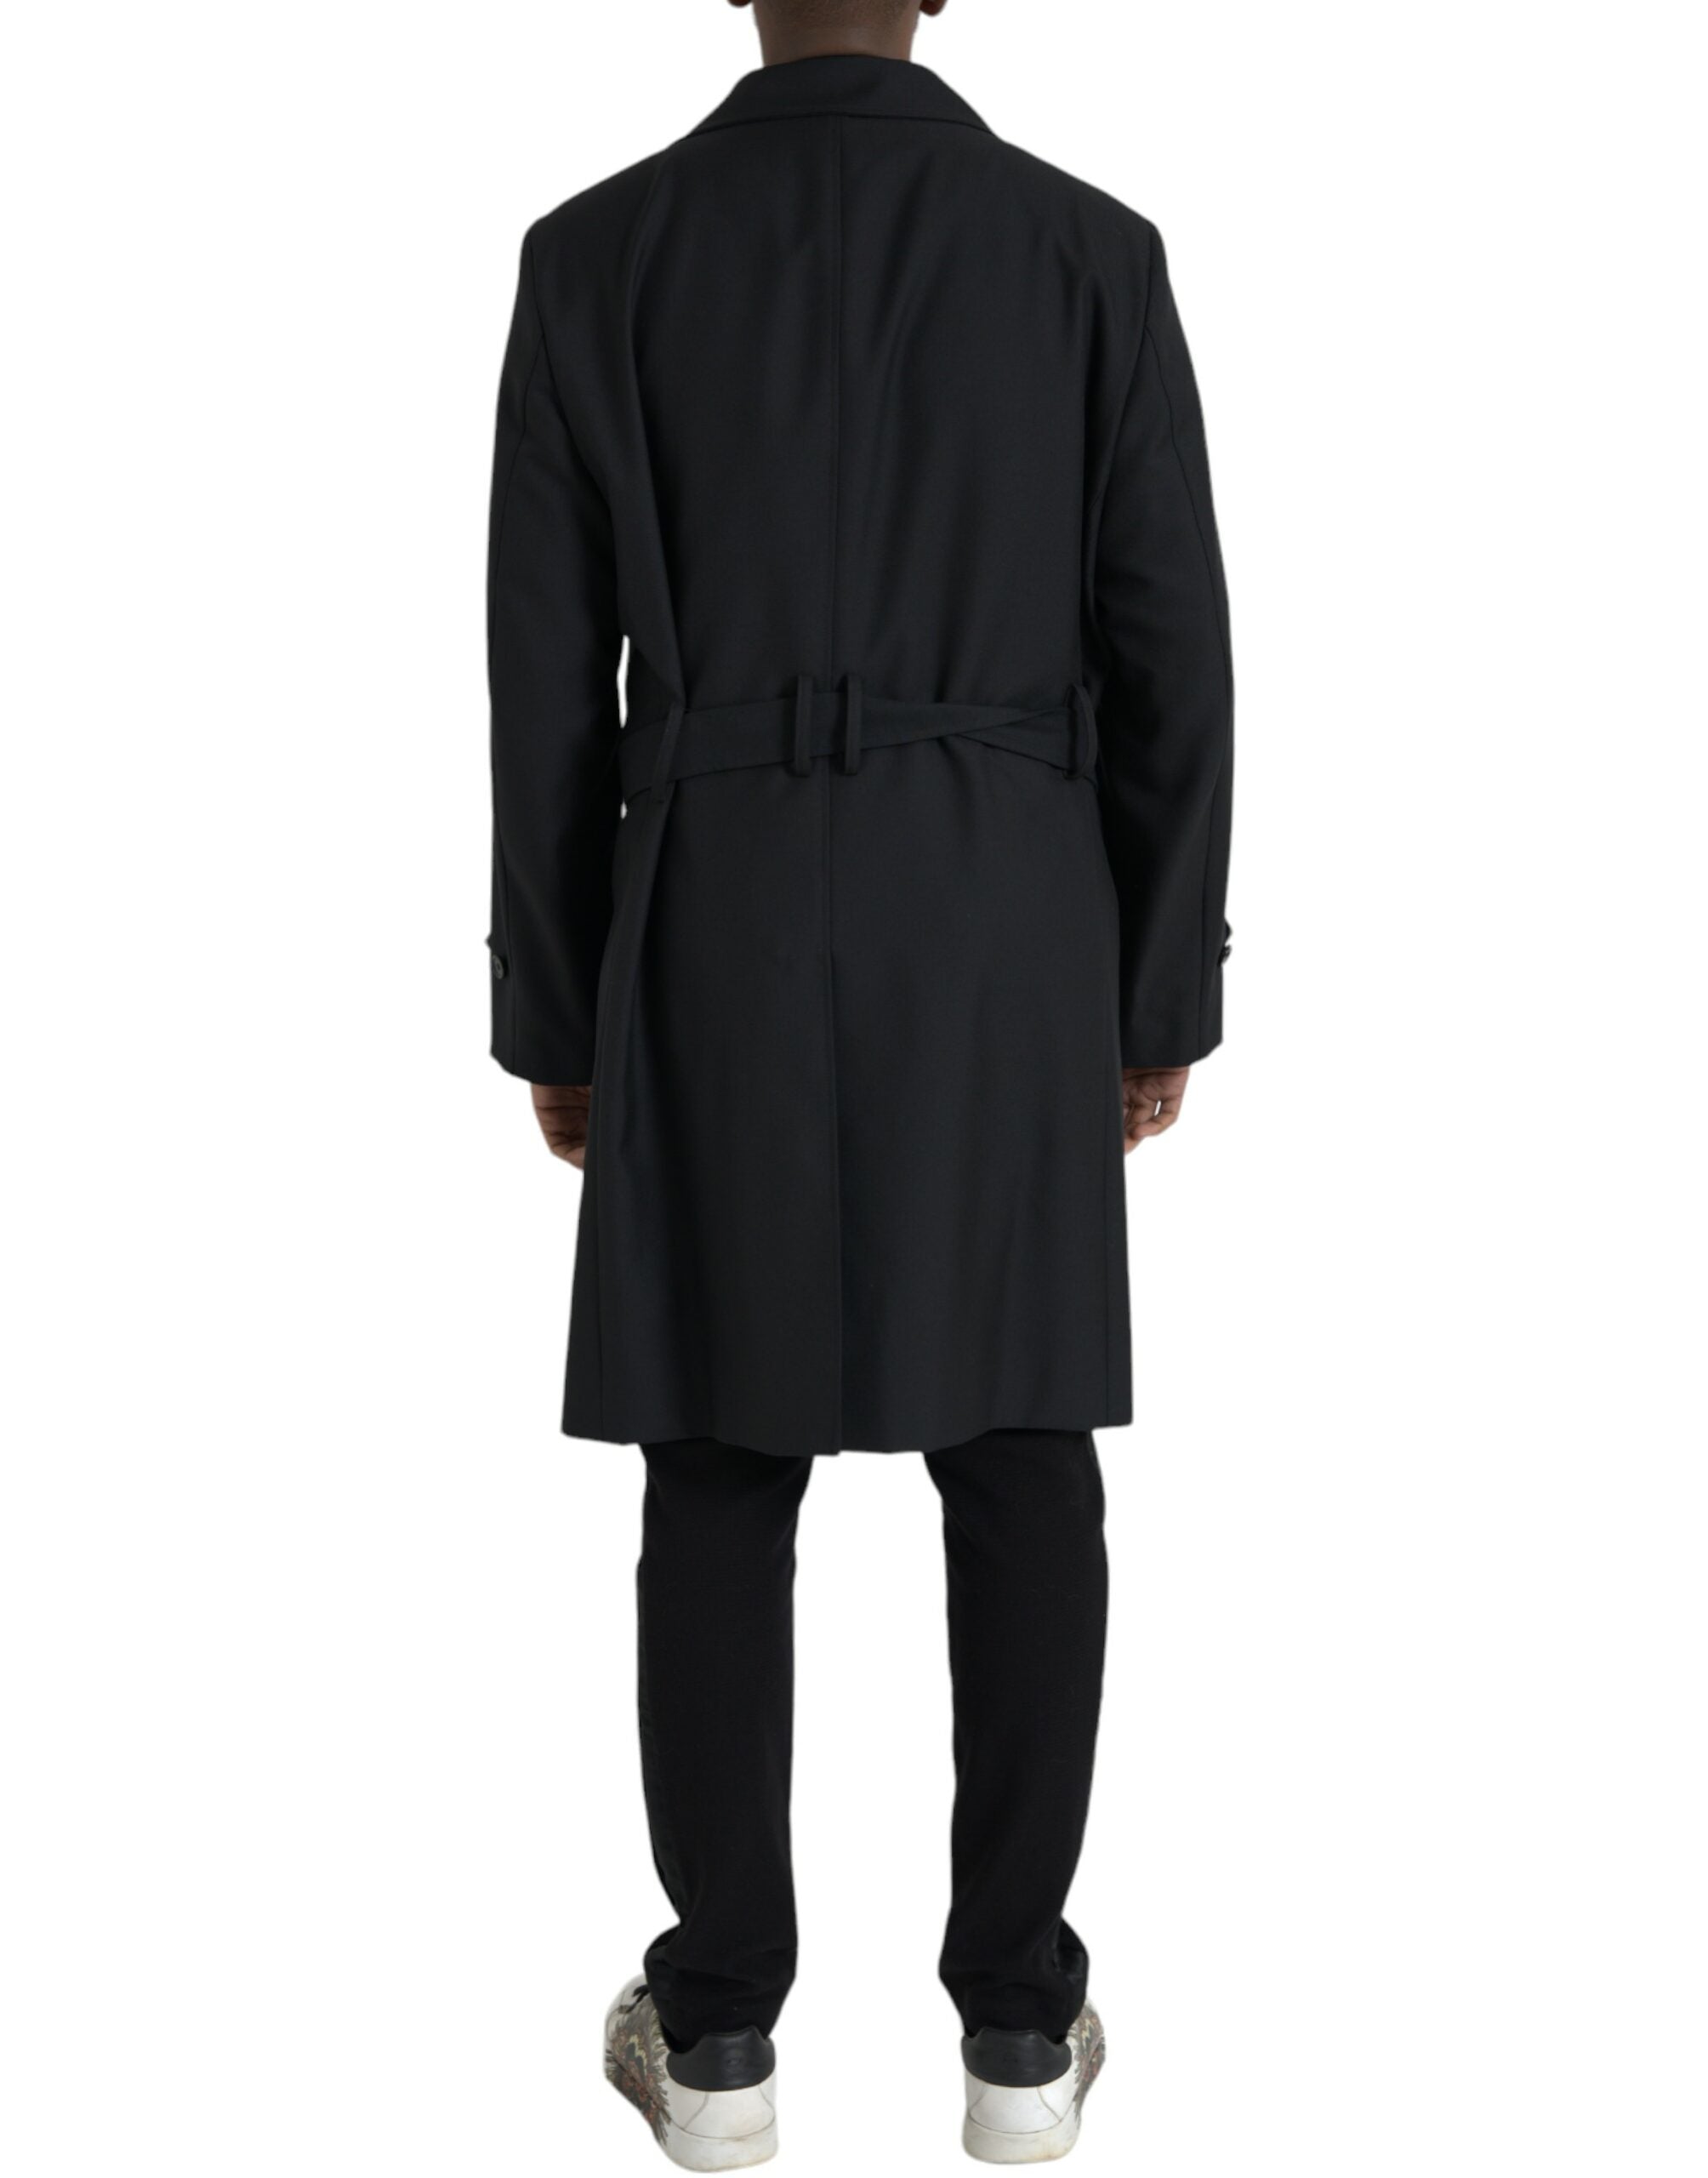 Dolce & Gabbana Black Double Breasted Trench Coat Jacket